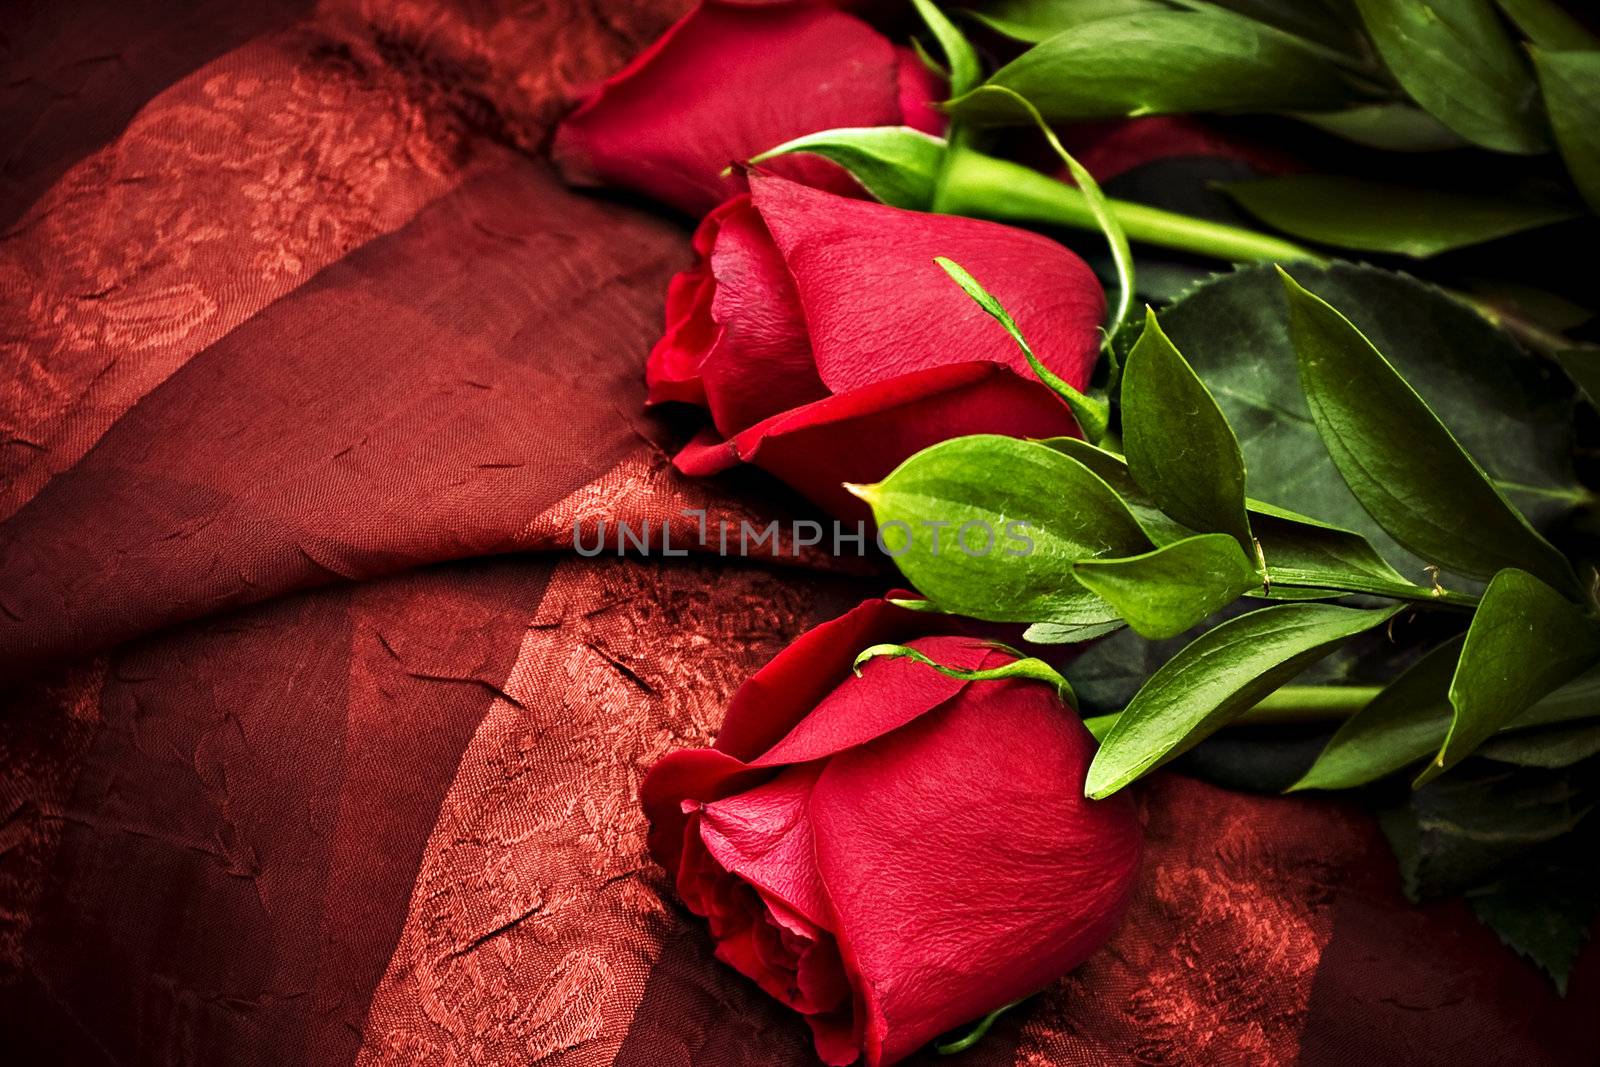 Three beautiful roses on a red background

